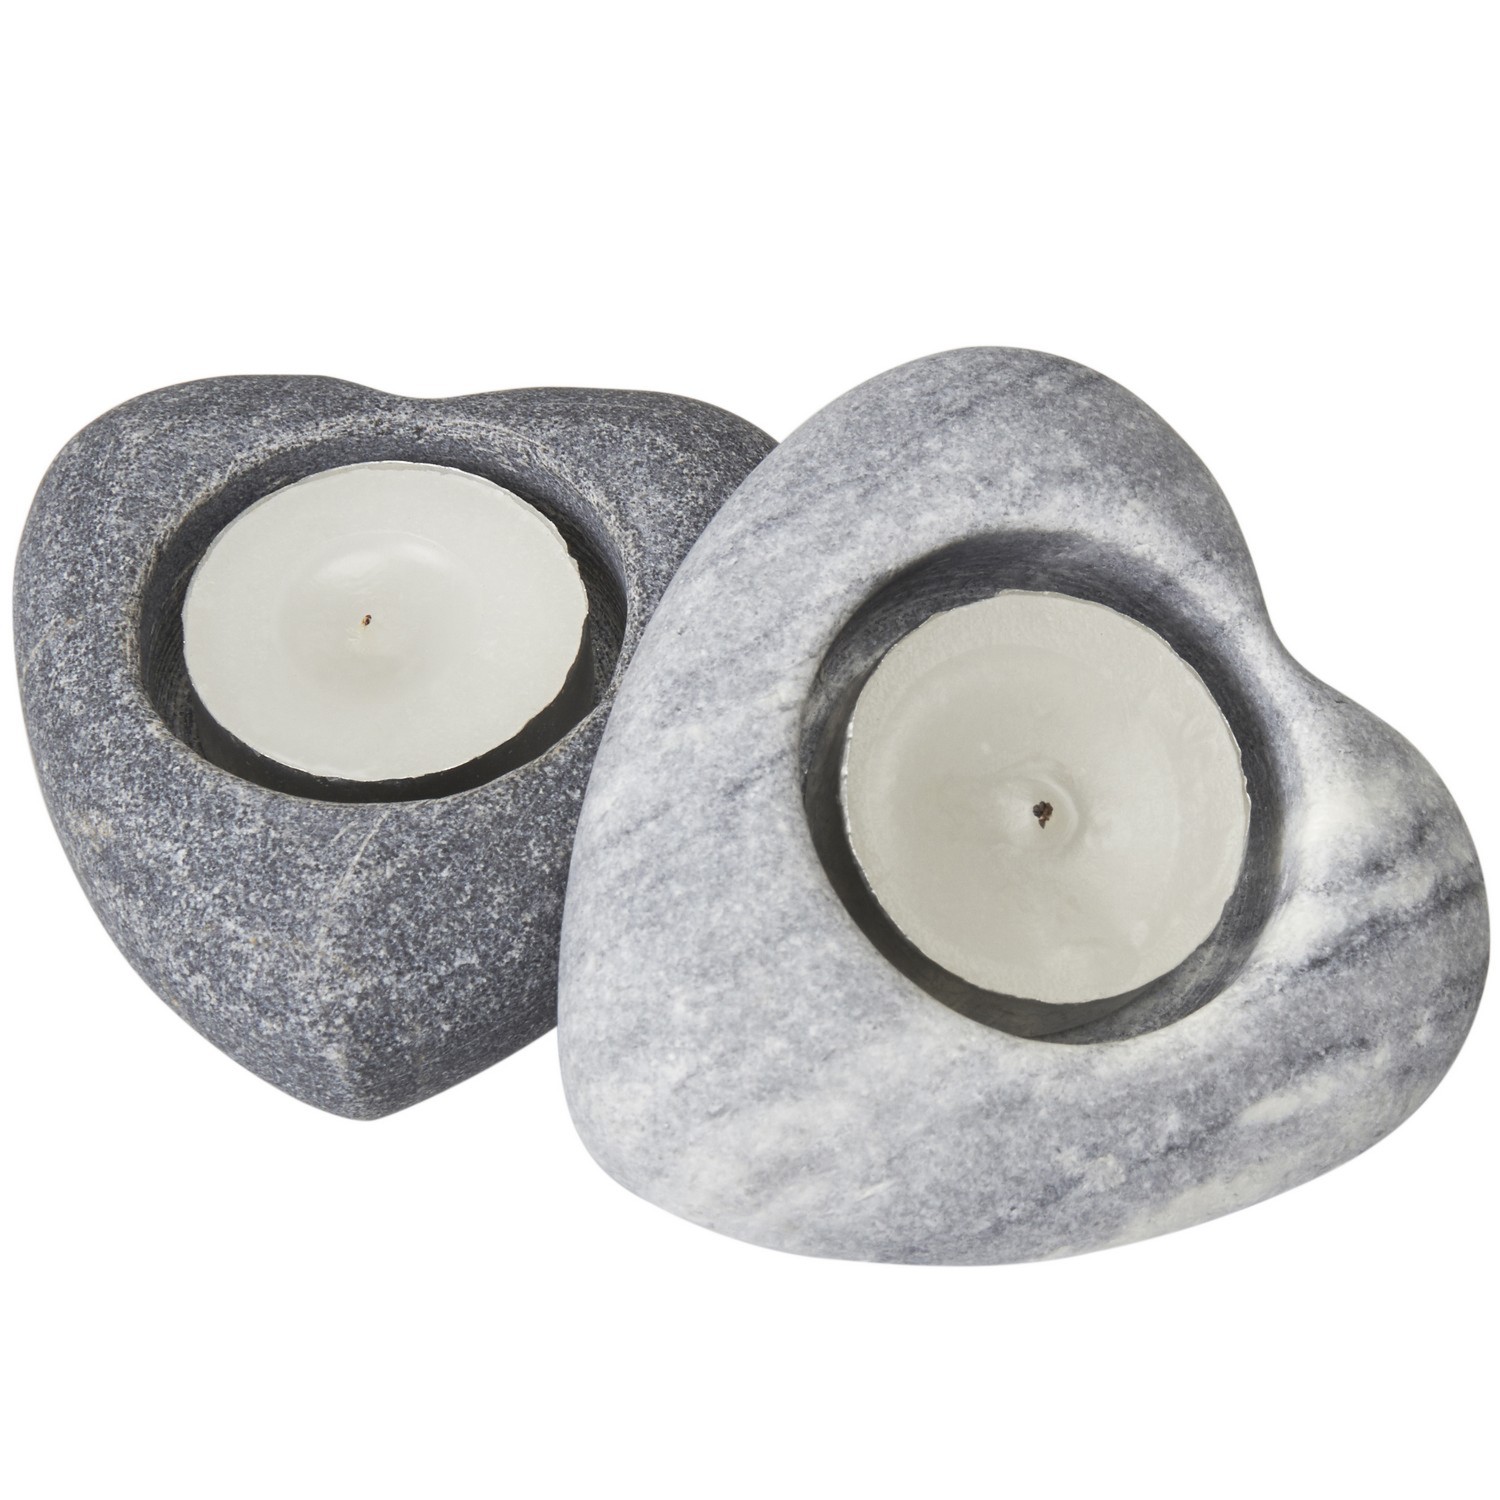 Single Grey Stone Heart Tealight Candle Holder in Assorted styles Image 1